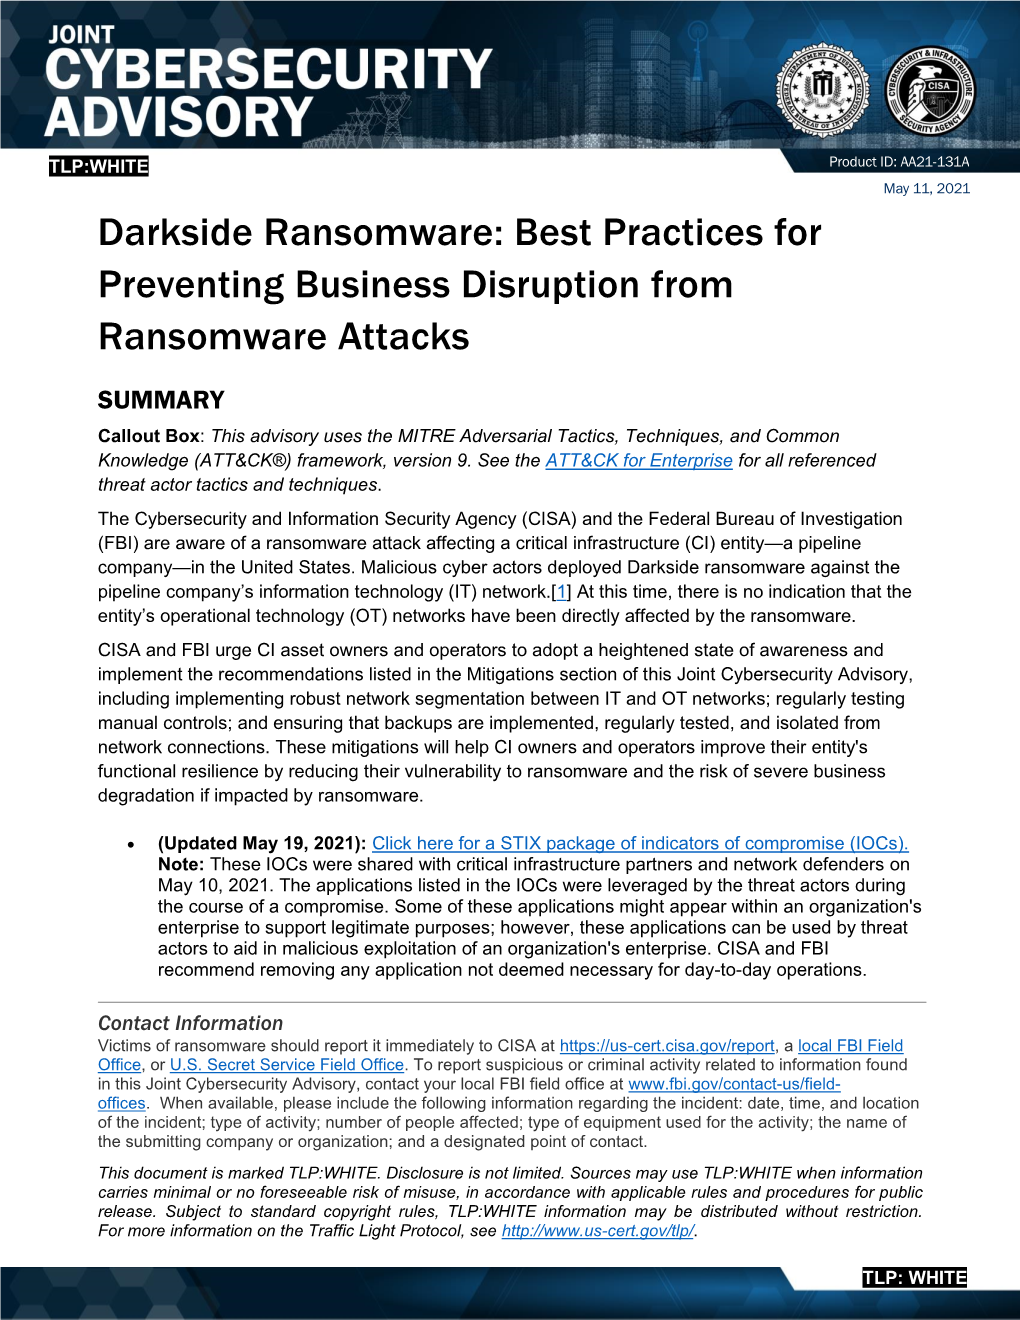 Darkside Ransomware: Best Practices for Preventing Business Disruption From